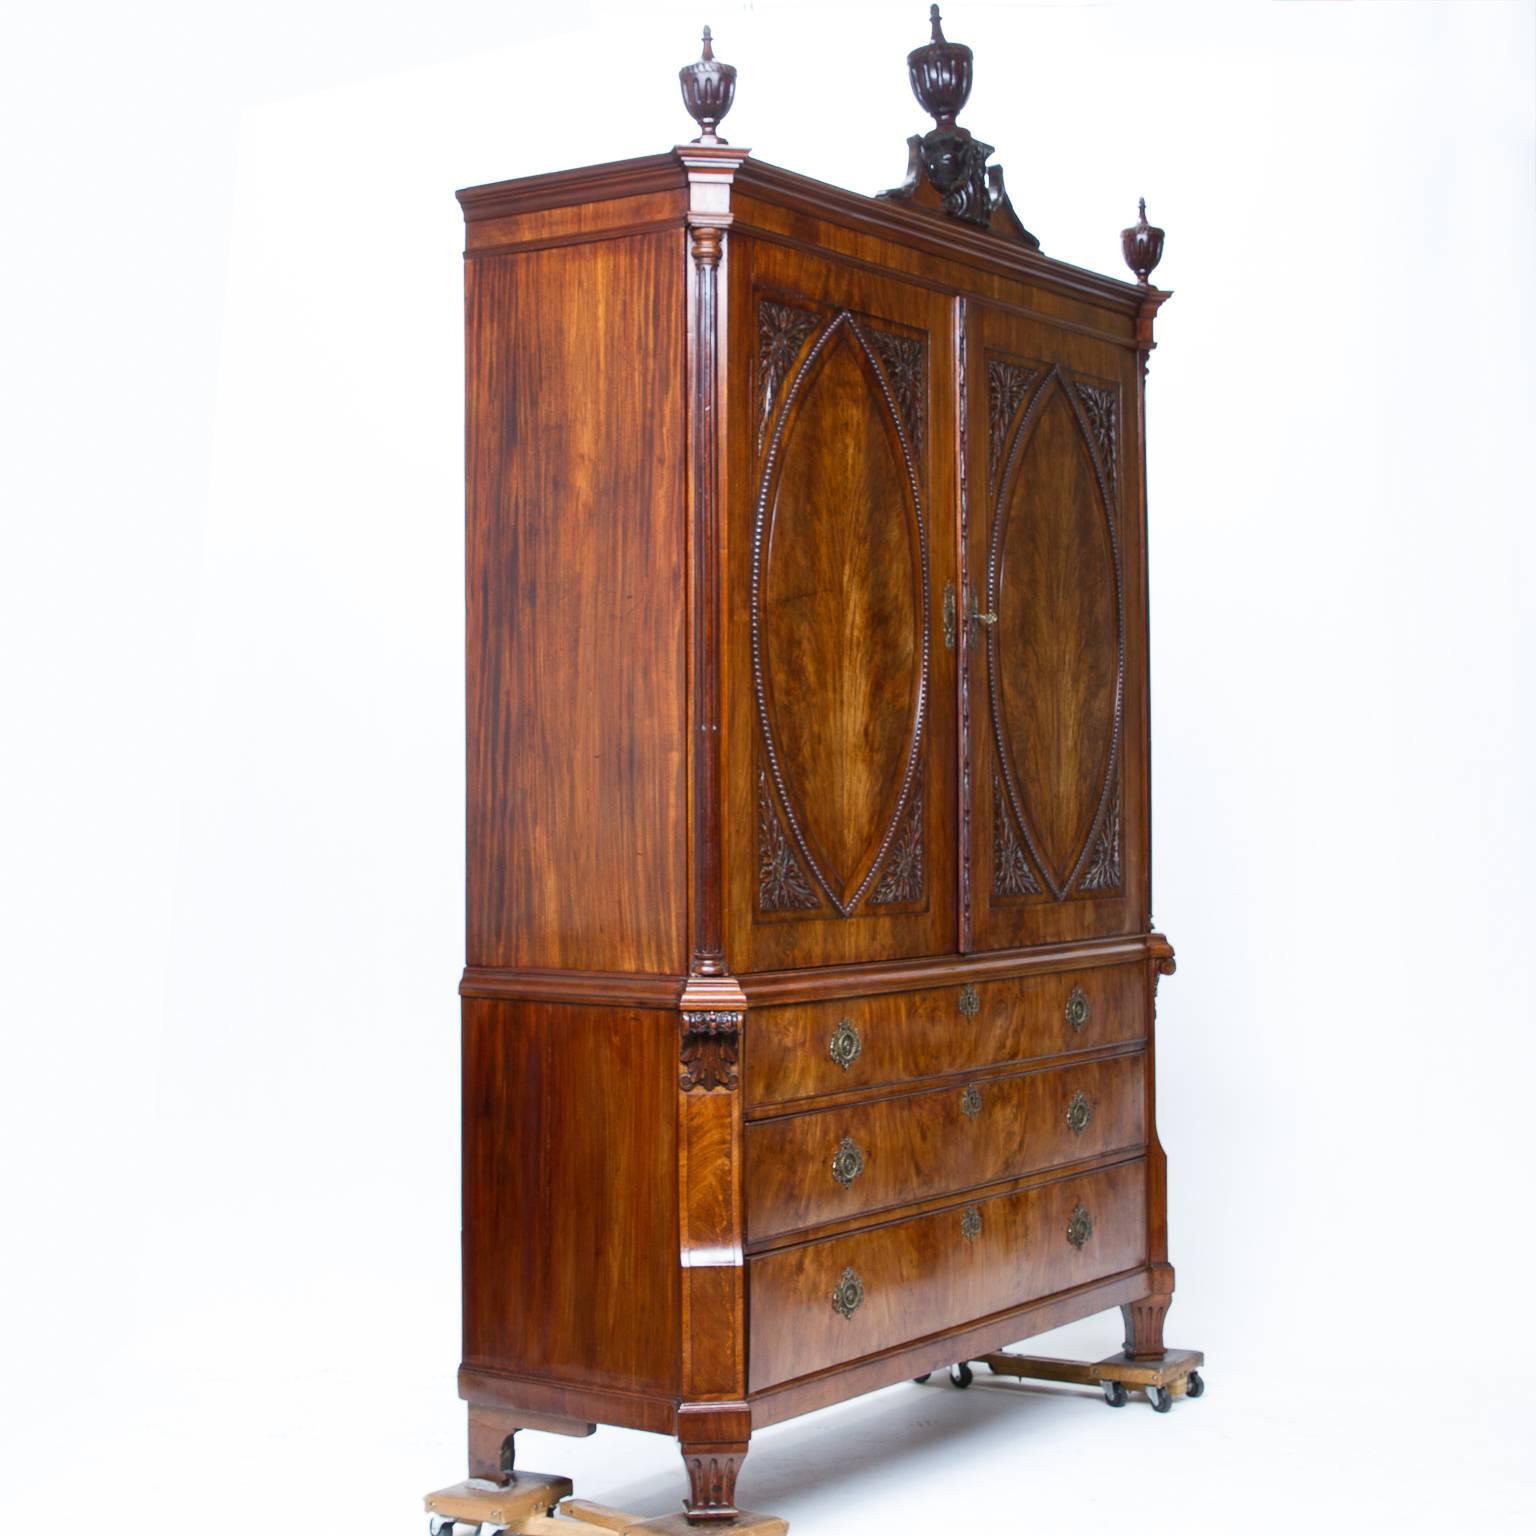 18th century, Dutch, Louis XVI mahogany cabinet

This is an impressive linen press cabinet. It consists of two beautiful doors on the front with raised oval panel doors and four carvings fitted to make a rectangular panel. The molding covering the